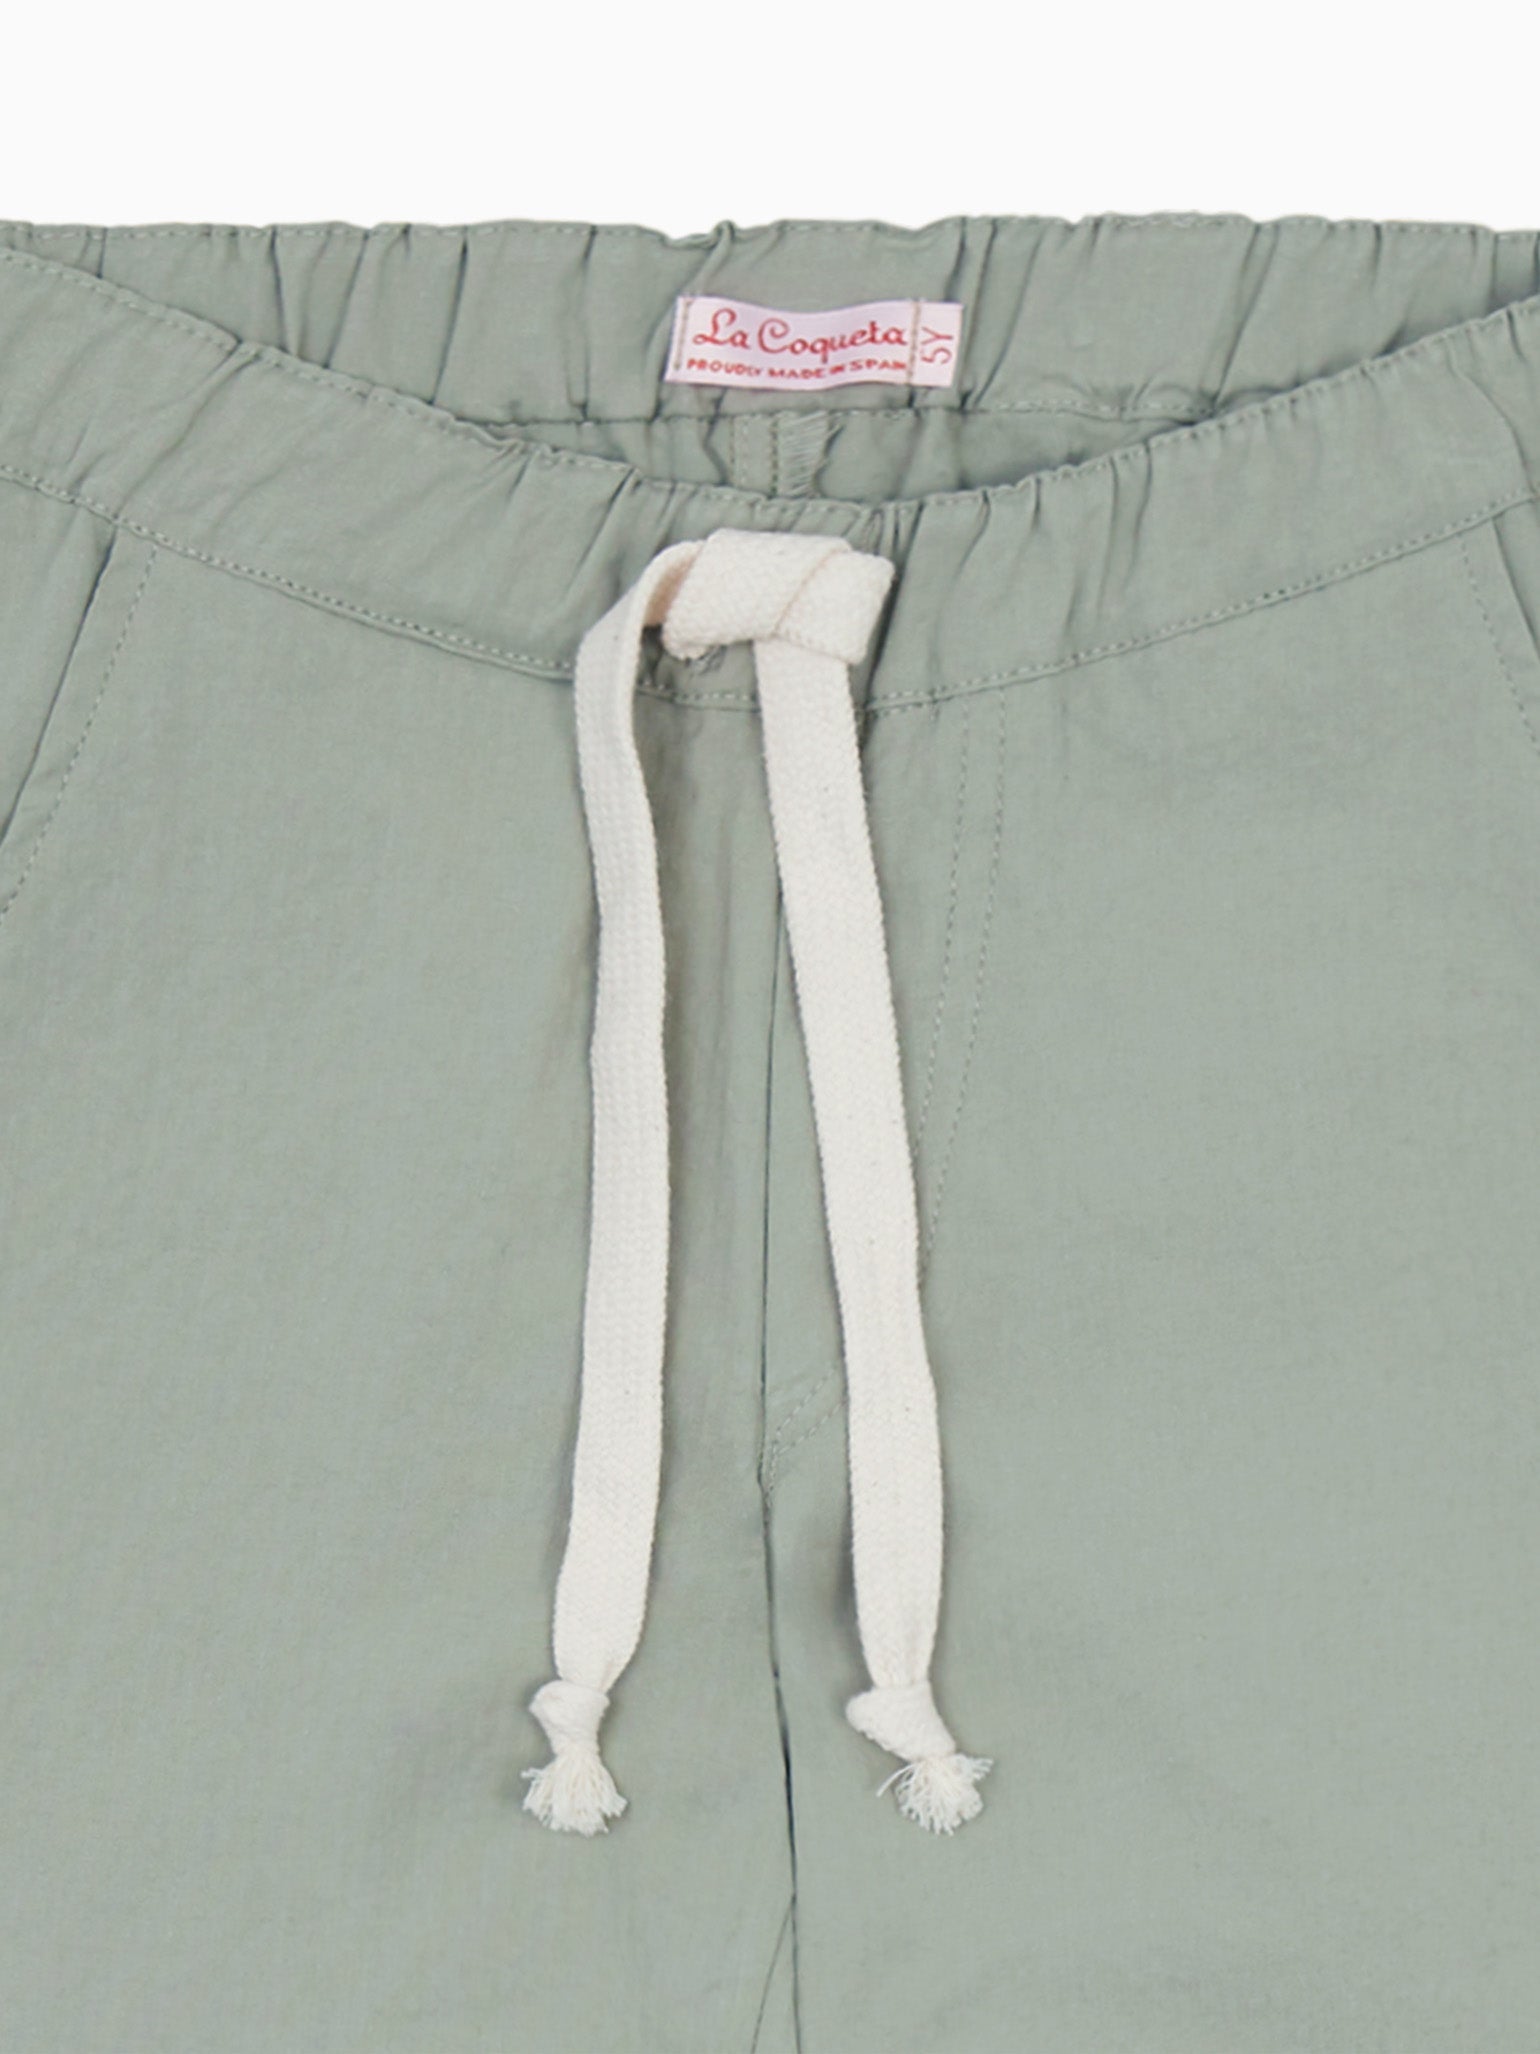 Sage Green Andreas Boy Cotton Trousers